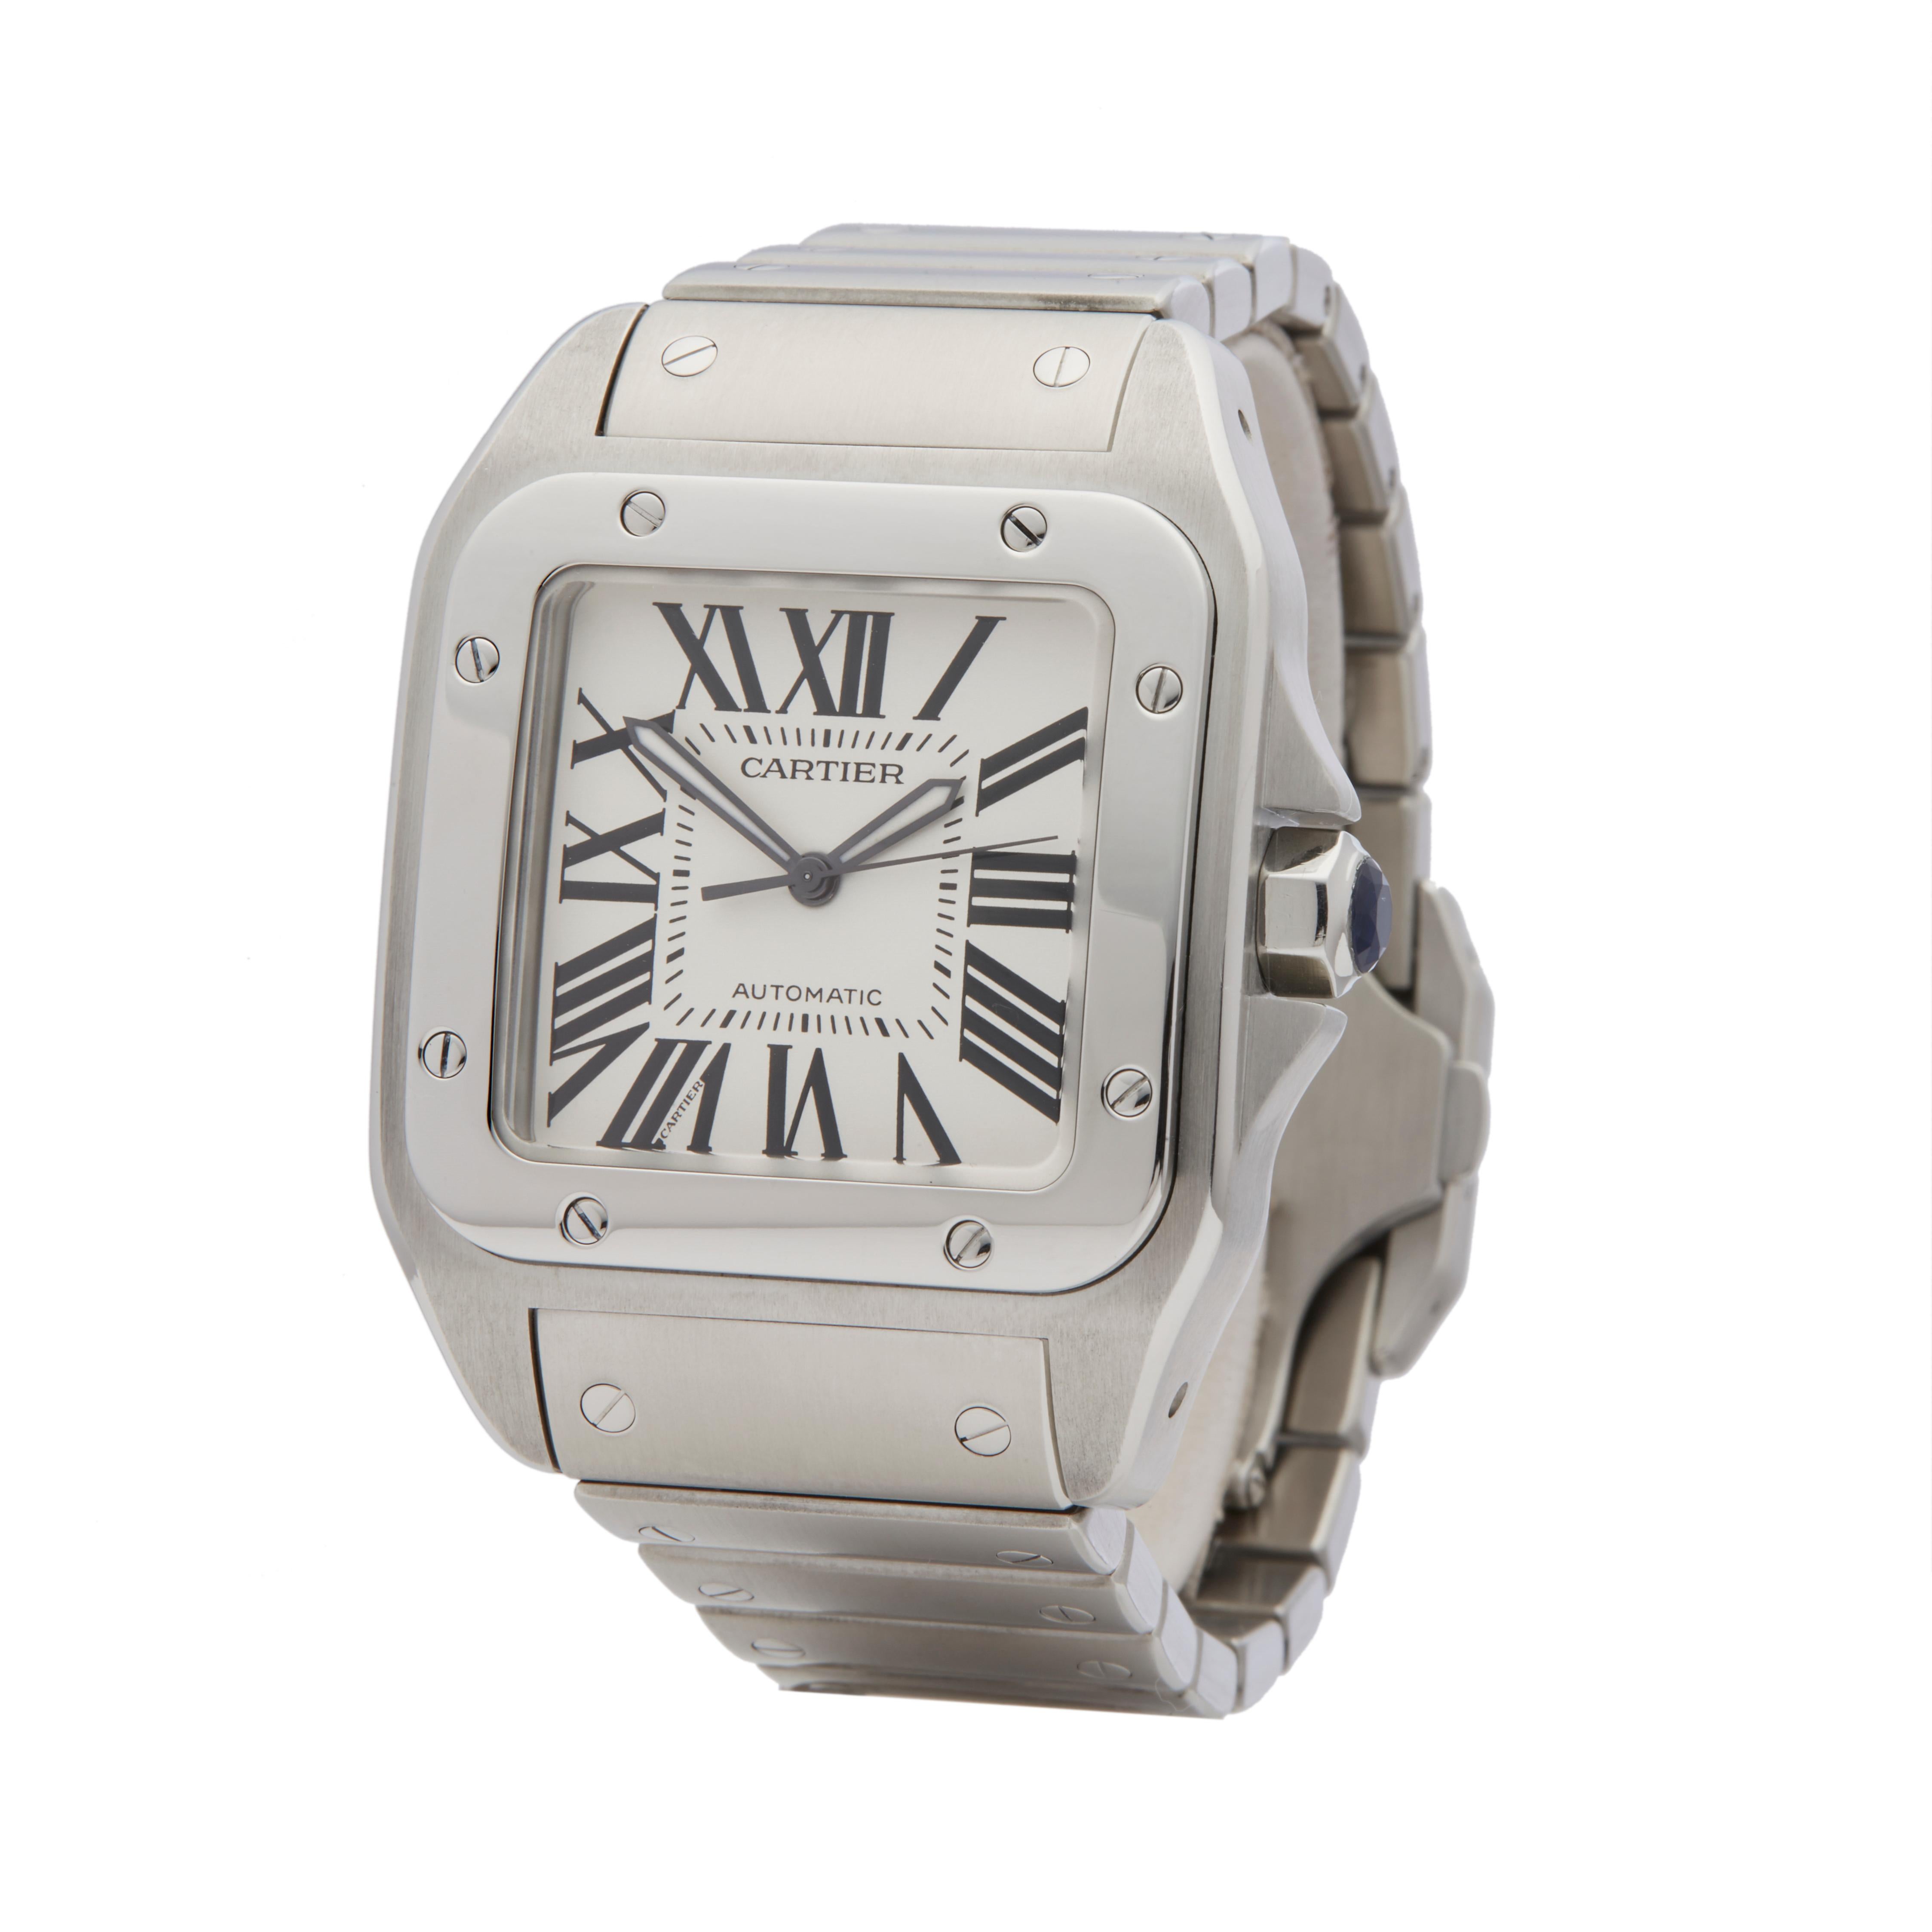 Contemporary 2008 Cartier Santos 100 Stainless Steel 2858 Wristwatch
 *
 *Complete with: Presentation Pouch & Guarantee dated 30th August 2008
 *Case Size: 38mm by 51mm
 *Strap: Stainless Steel
 *Age: 2008
 *Strap length: Adjustable up to 16cm.